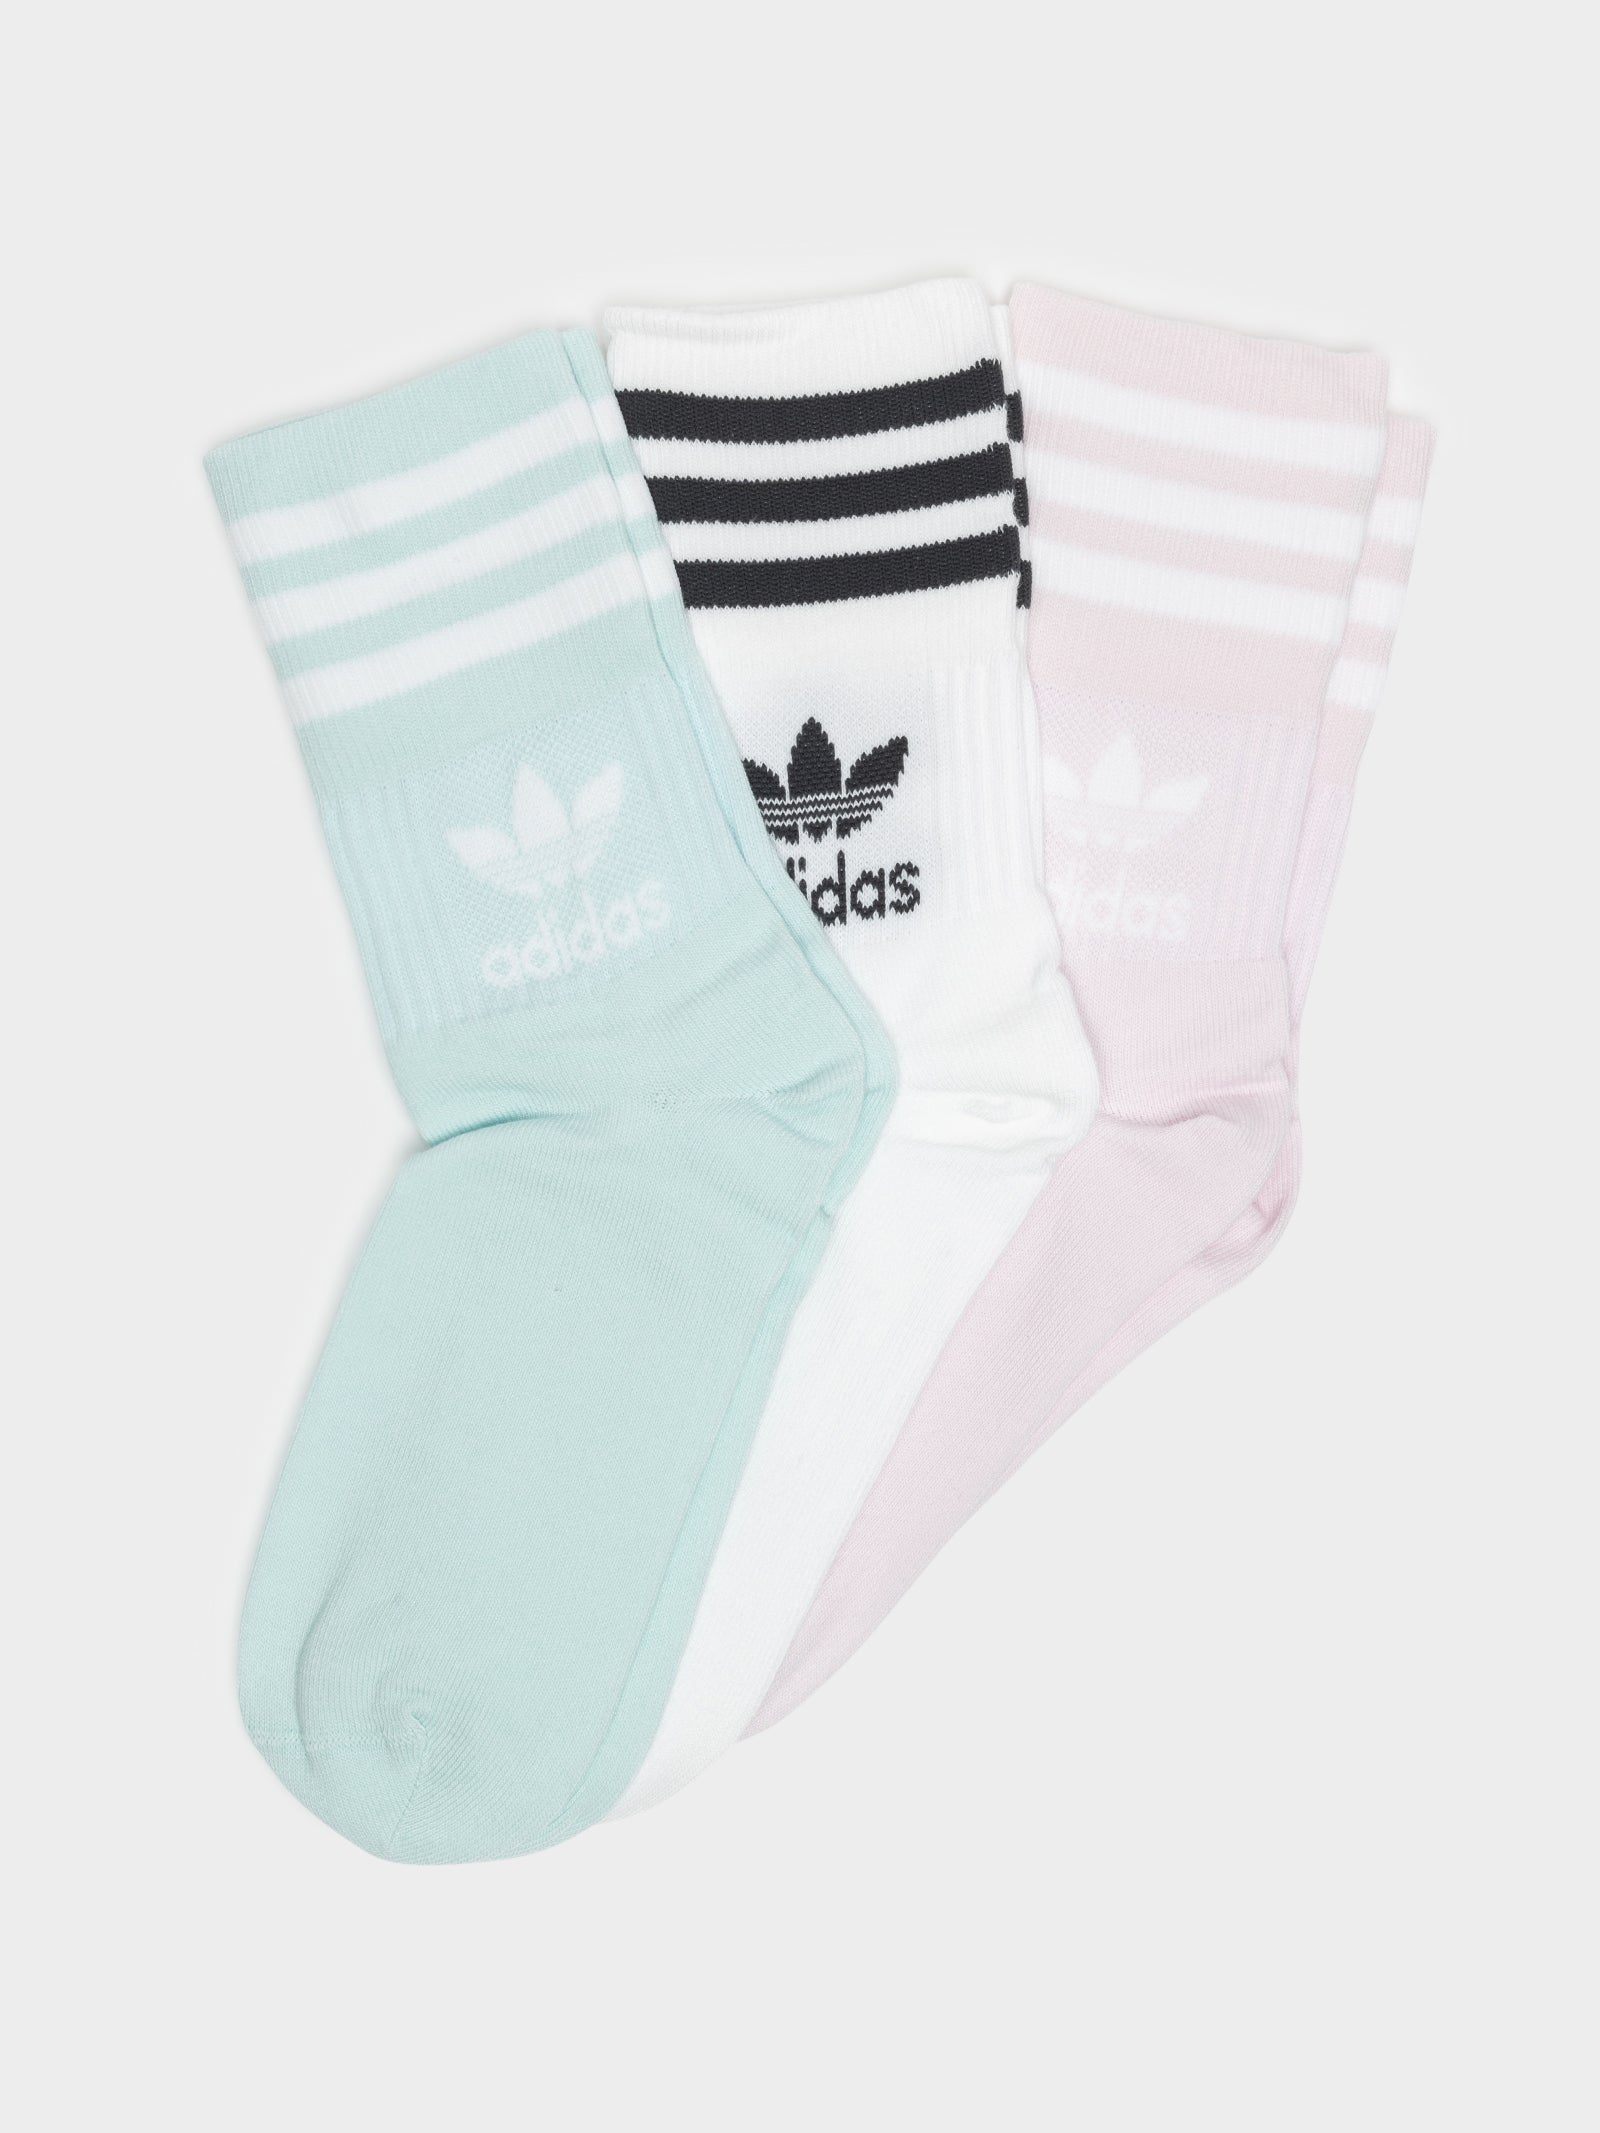 3 Pairs of Mid-Cut Solid Crew Socks in Almost Pink, White & Halo Mint ...